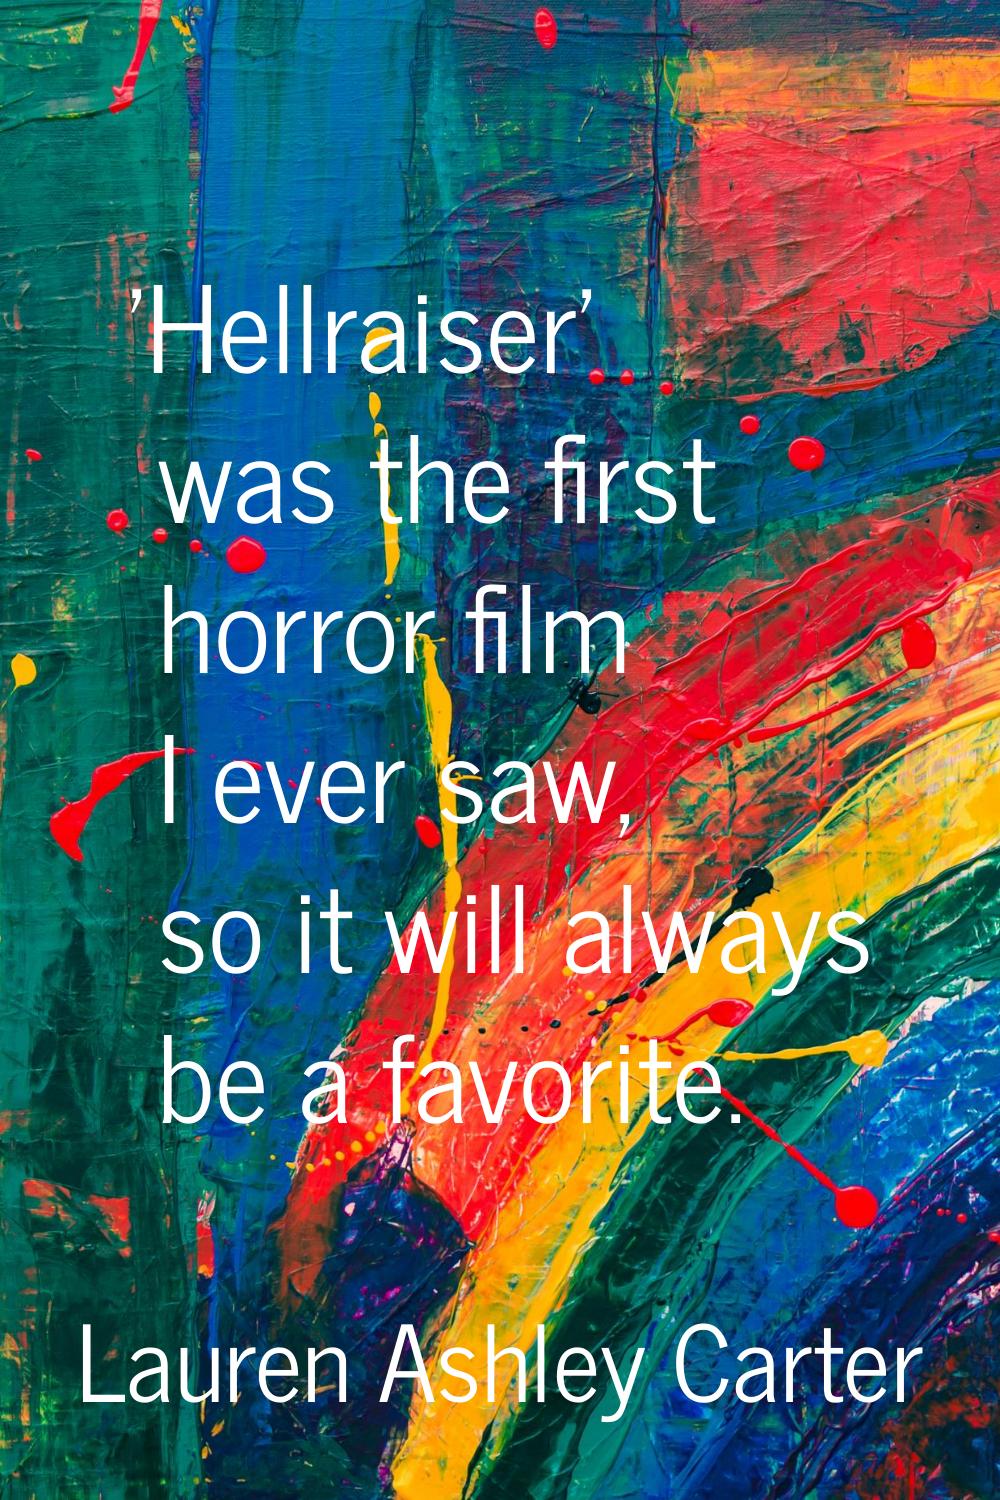 'Hellraiser' was the first horror film I ever saw, so it will always be a favorite.